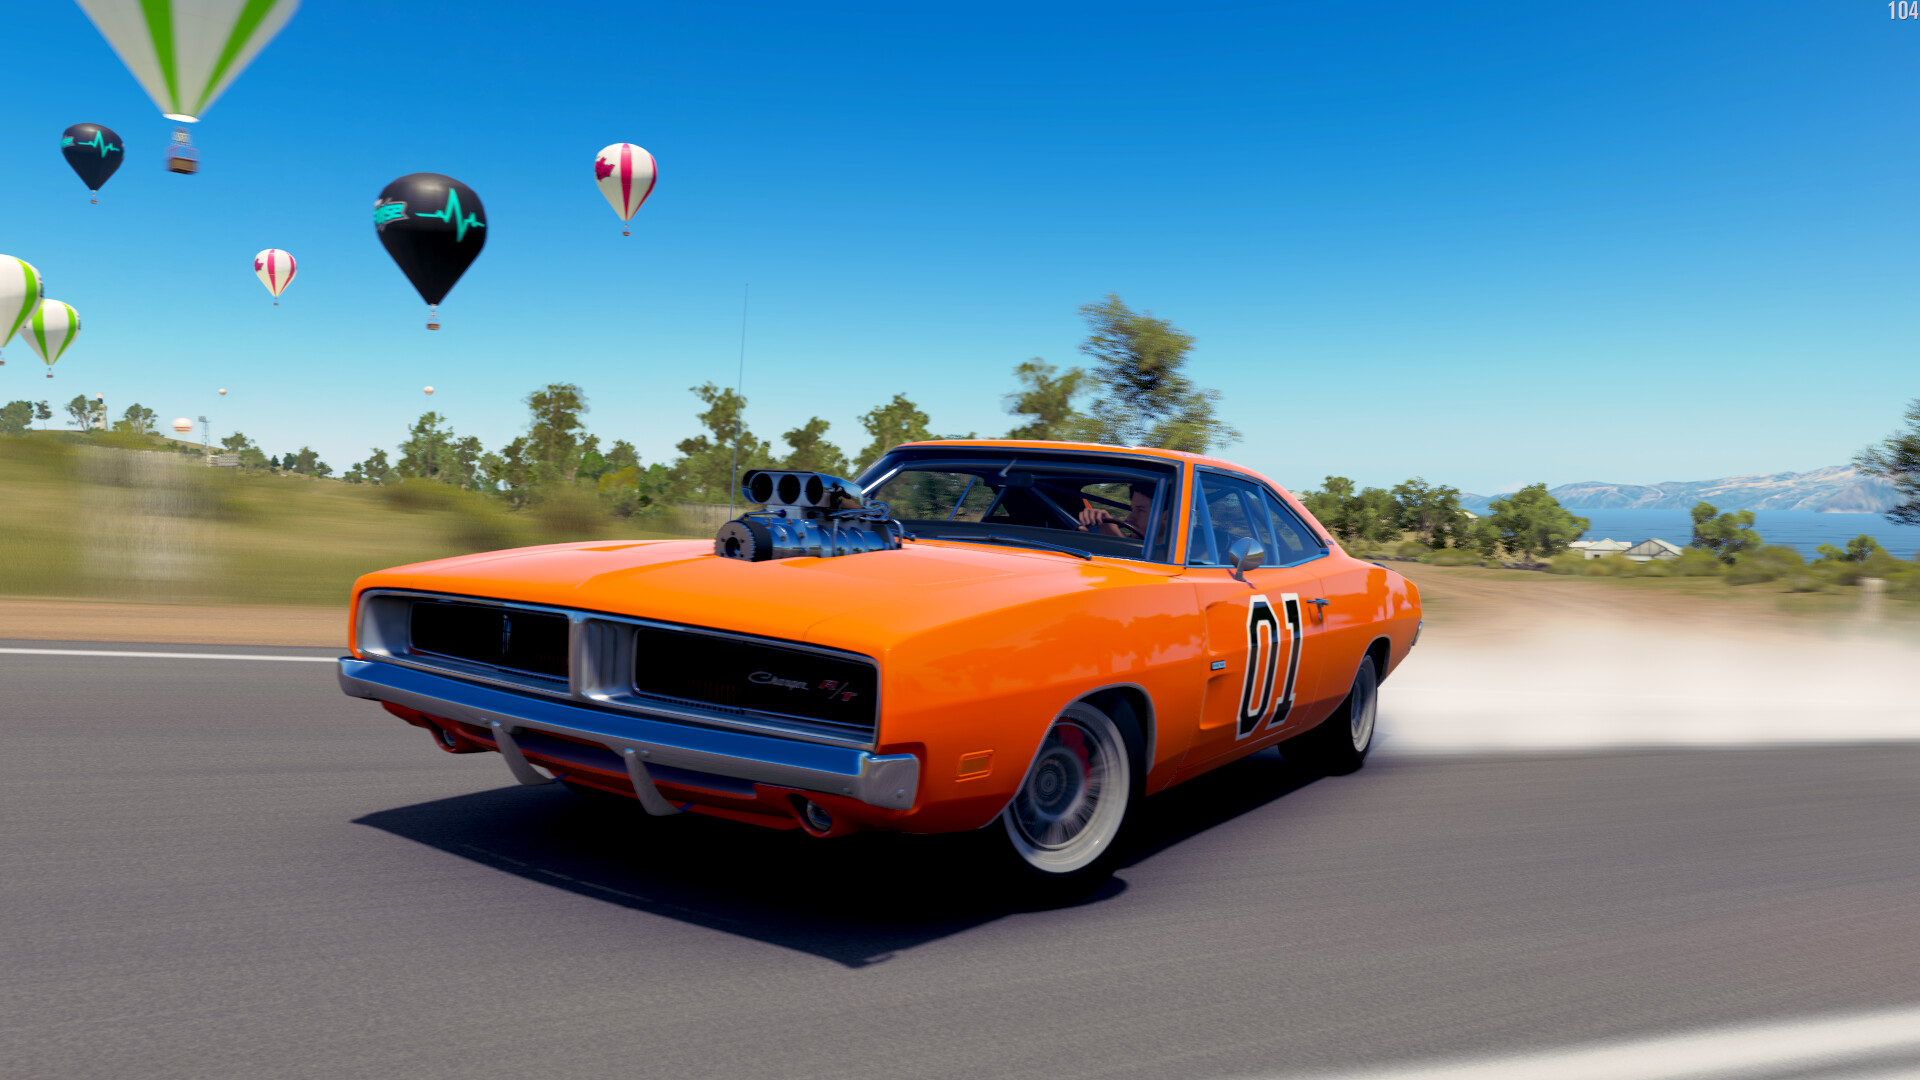 General Lee Car: Forza Horizon 4 General Lee, 1969 Dodge Charger R/T, A 2012 racing video game developed by Playground Games. 1920x1080 Full HD Wallpaper.